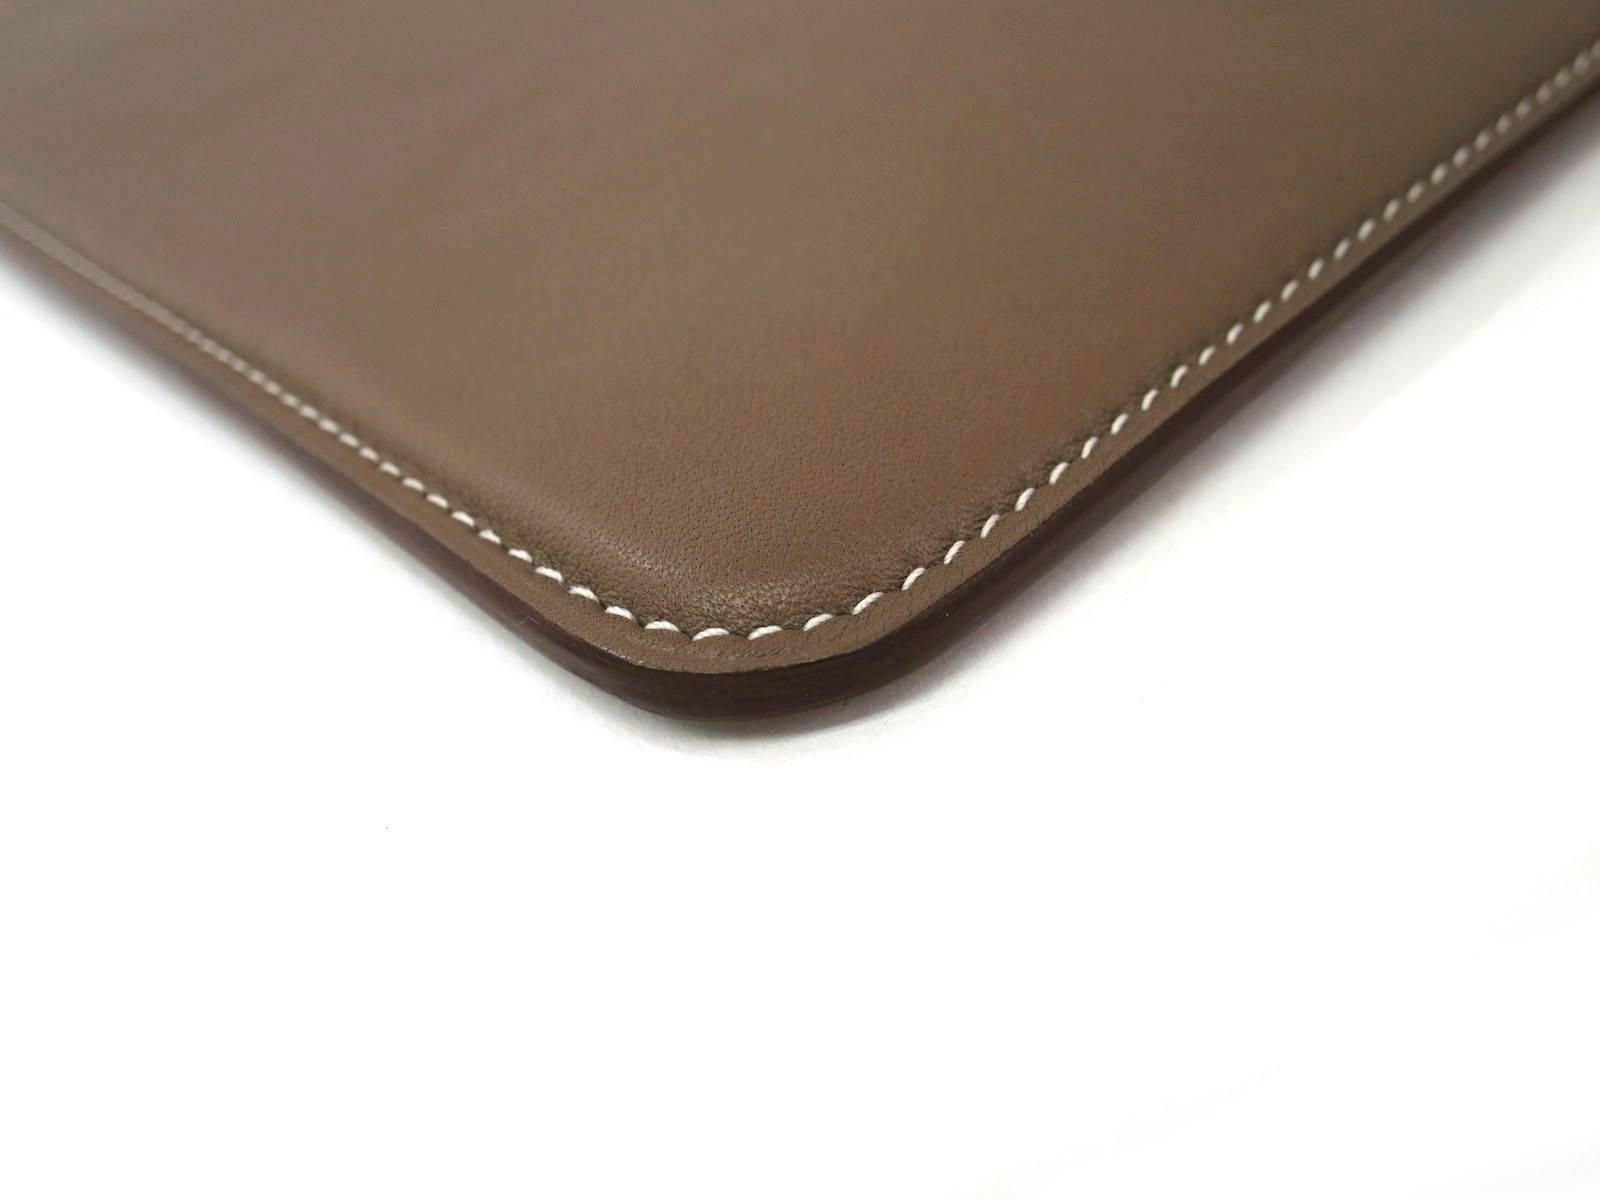 CURATOR'S NOTES

Hermes Brown Leather iPad Tech Accessory Carrying Case in Dust Bag  

Swift leather
Made in France
Date Code Square Q 
Measures 7.9" W x 9.8" H 
Includes original Hermes dust bag 